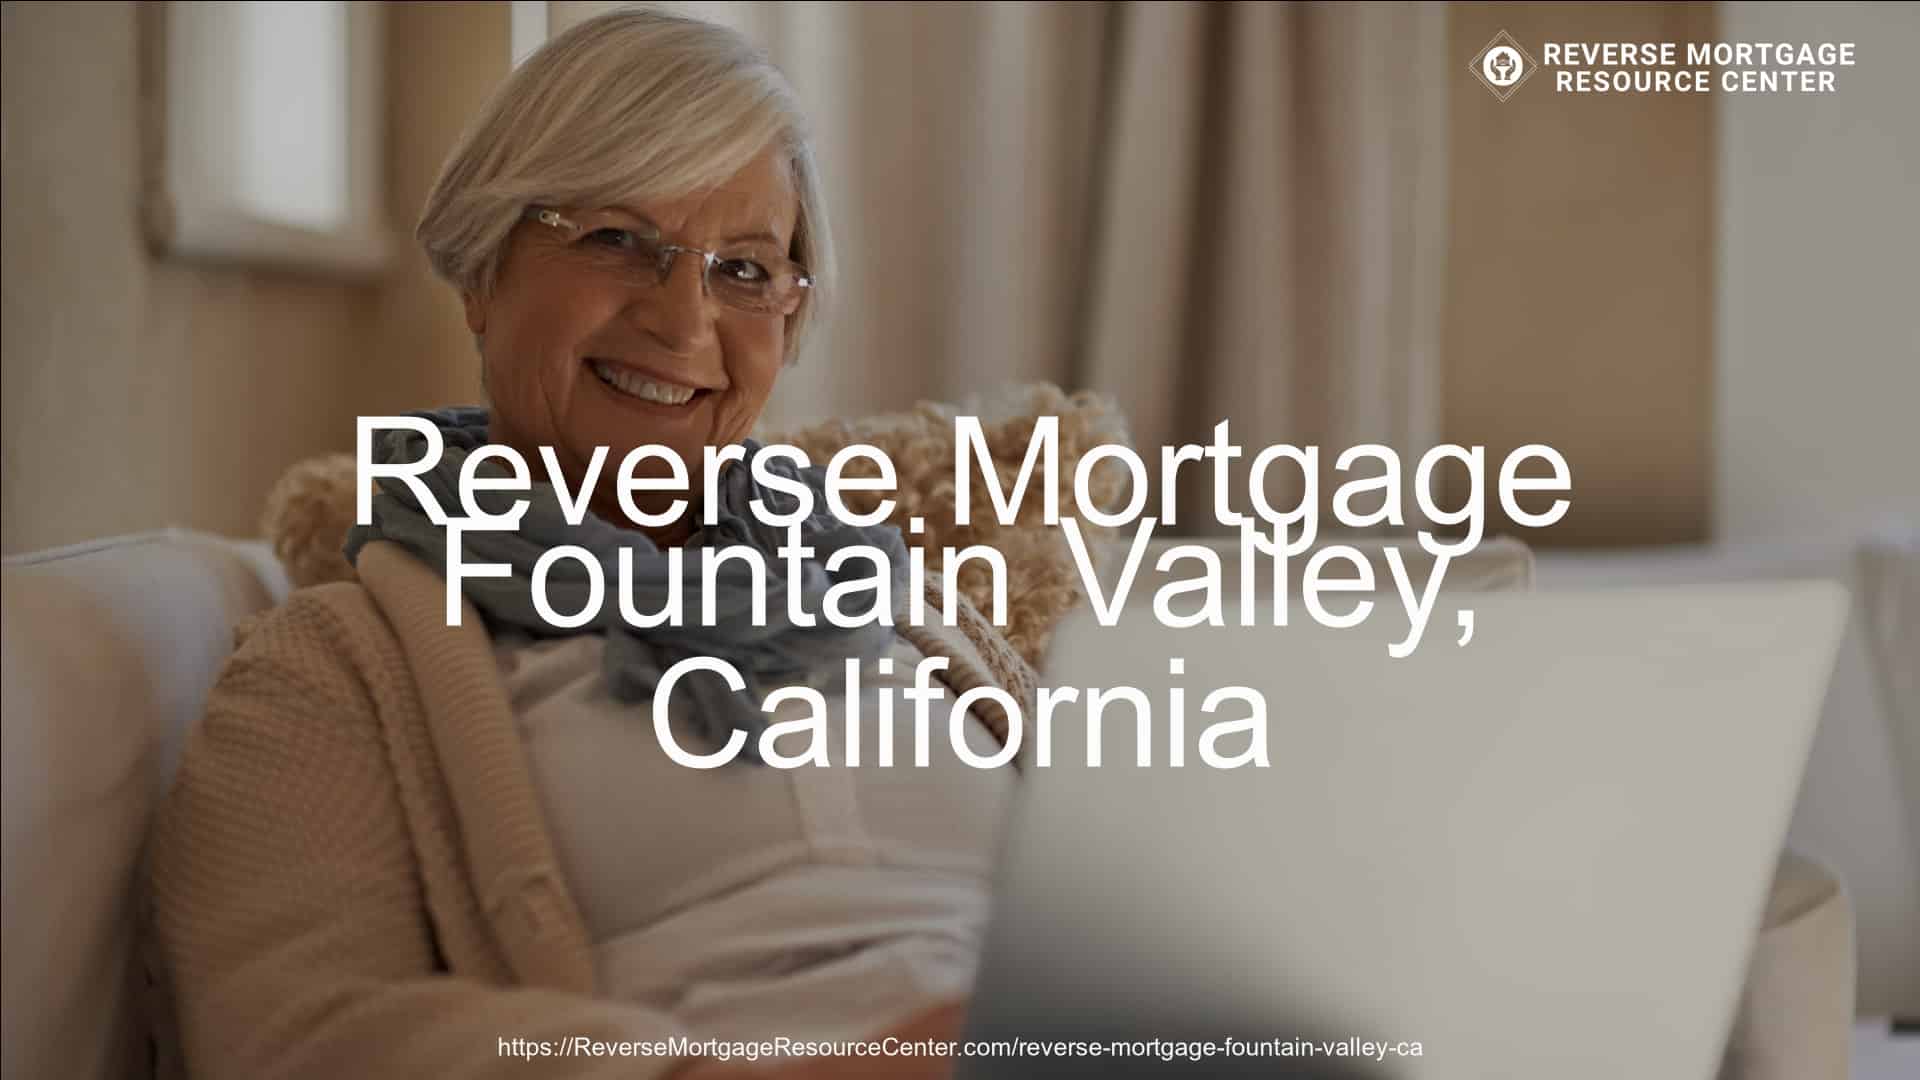 Reverse Mortgage in Fountain Valley, CA